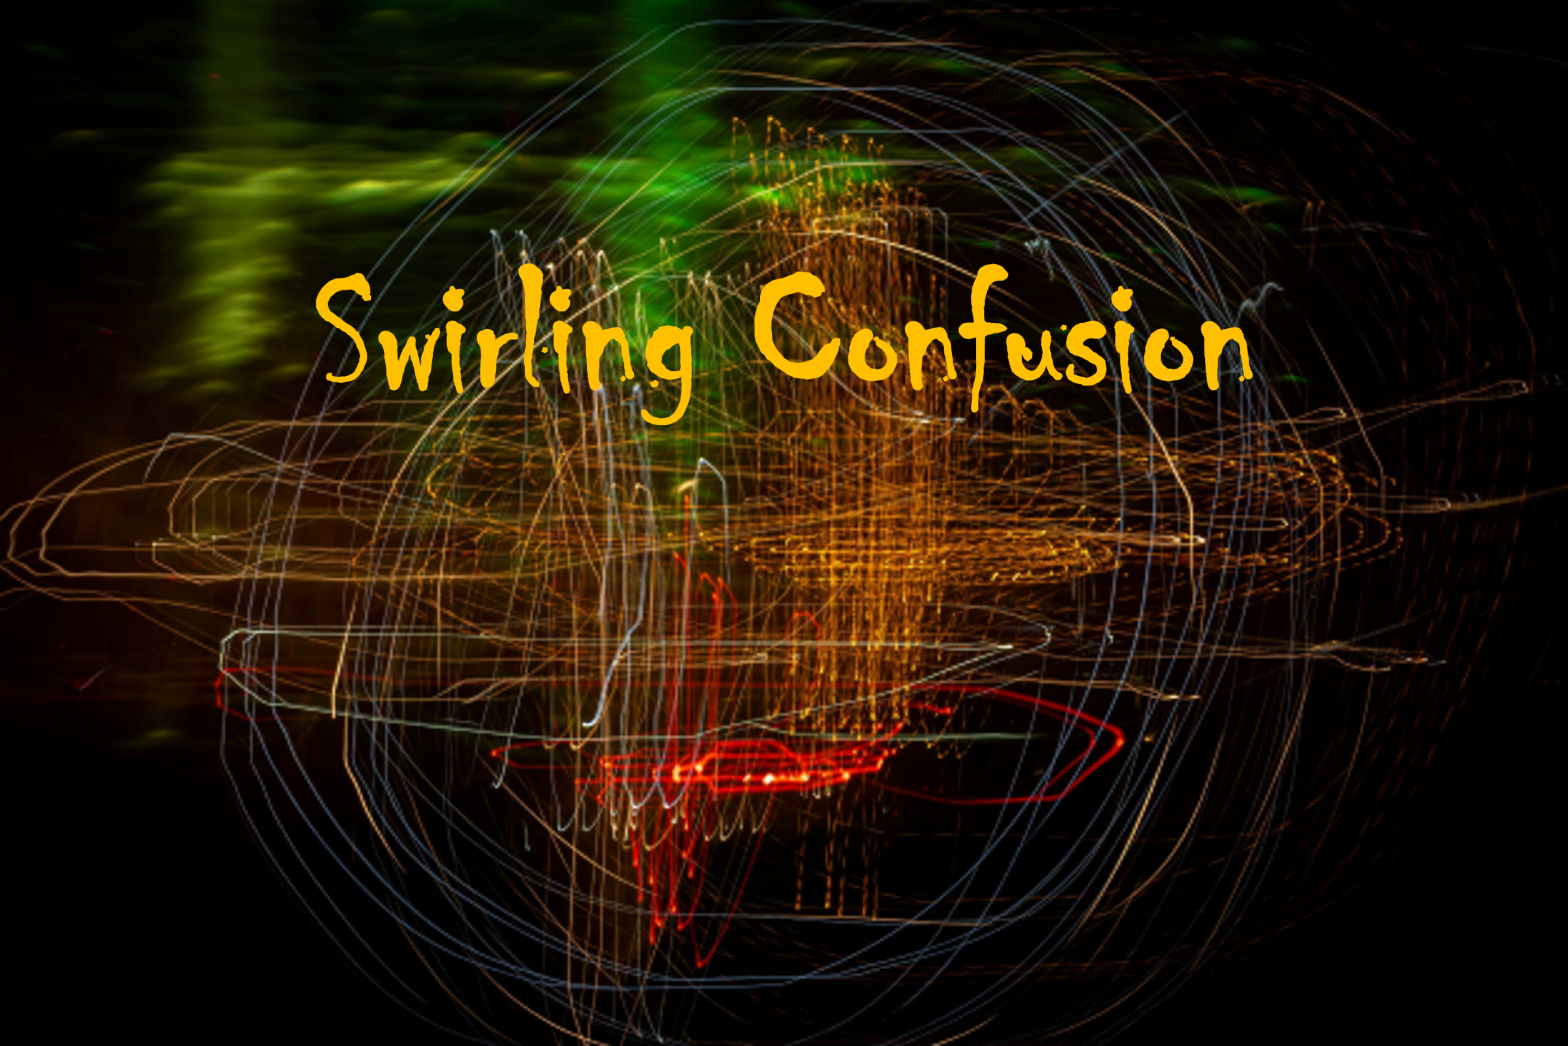 Swirling Confusion